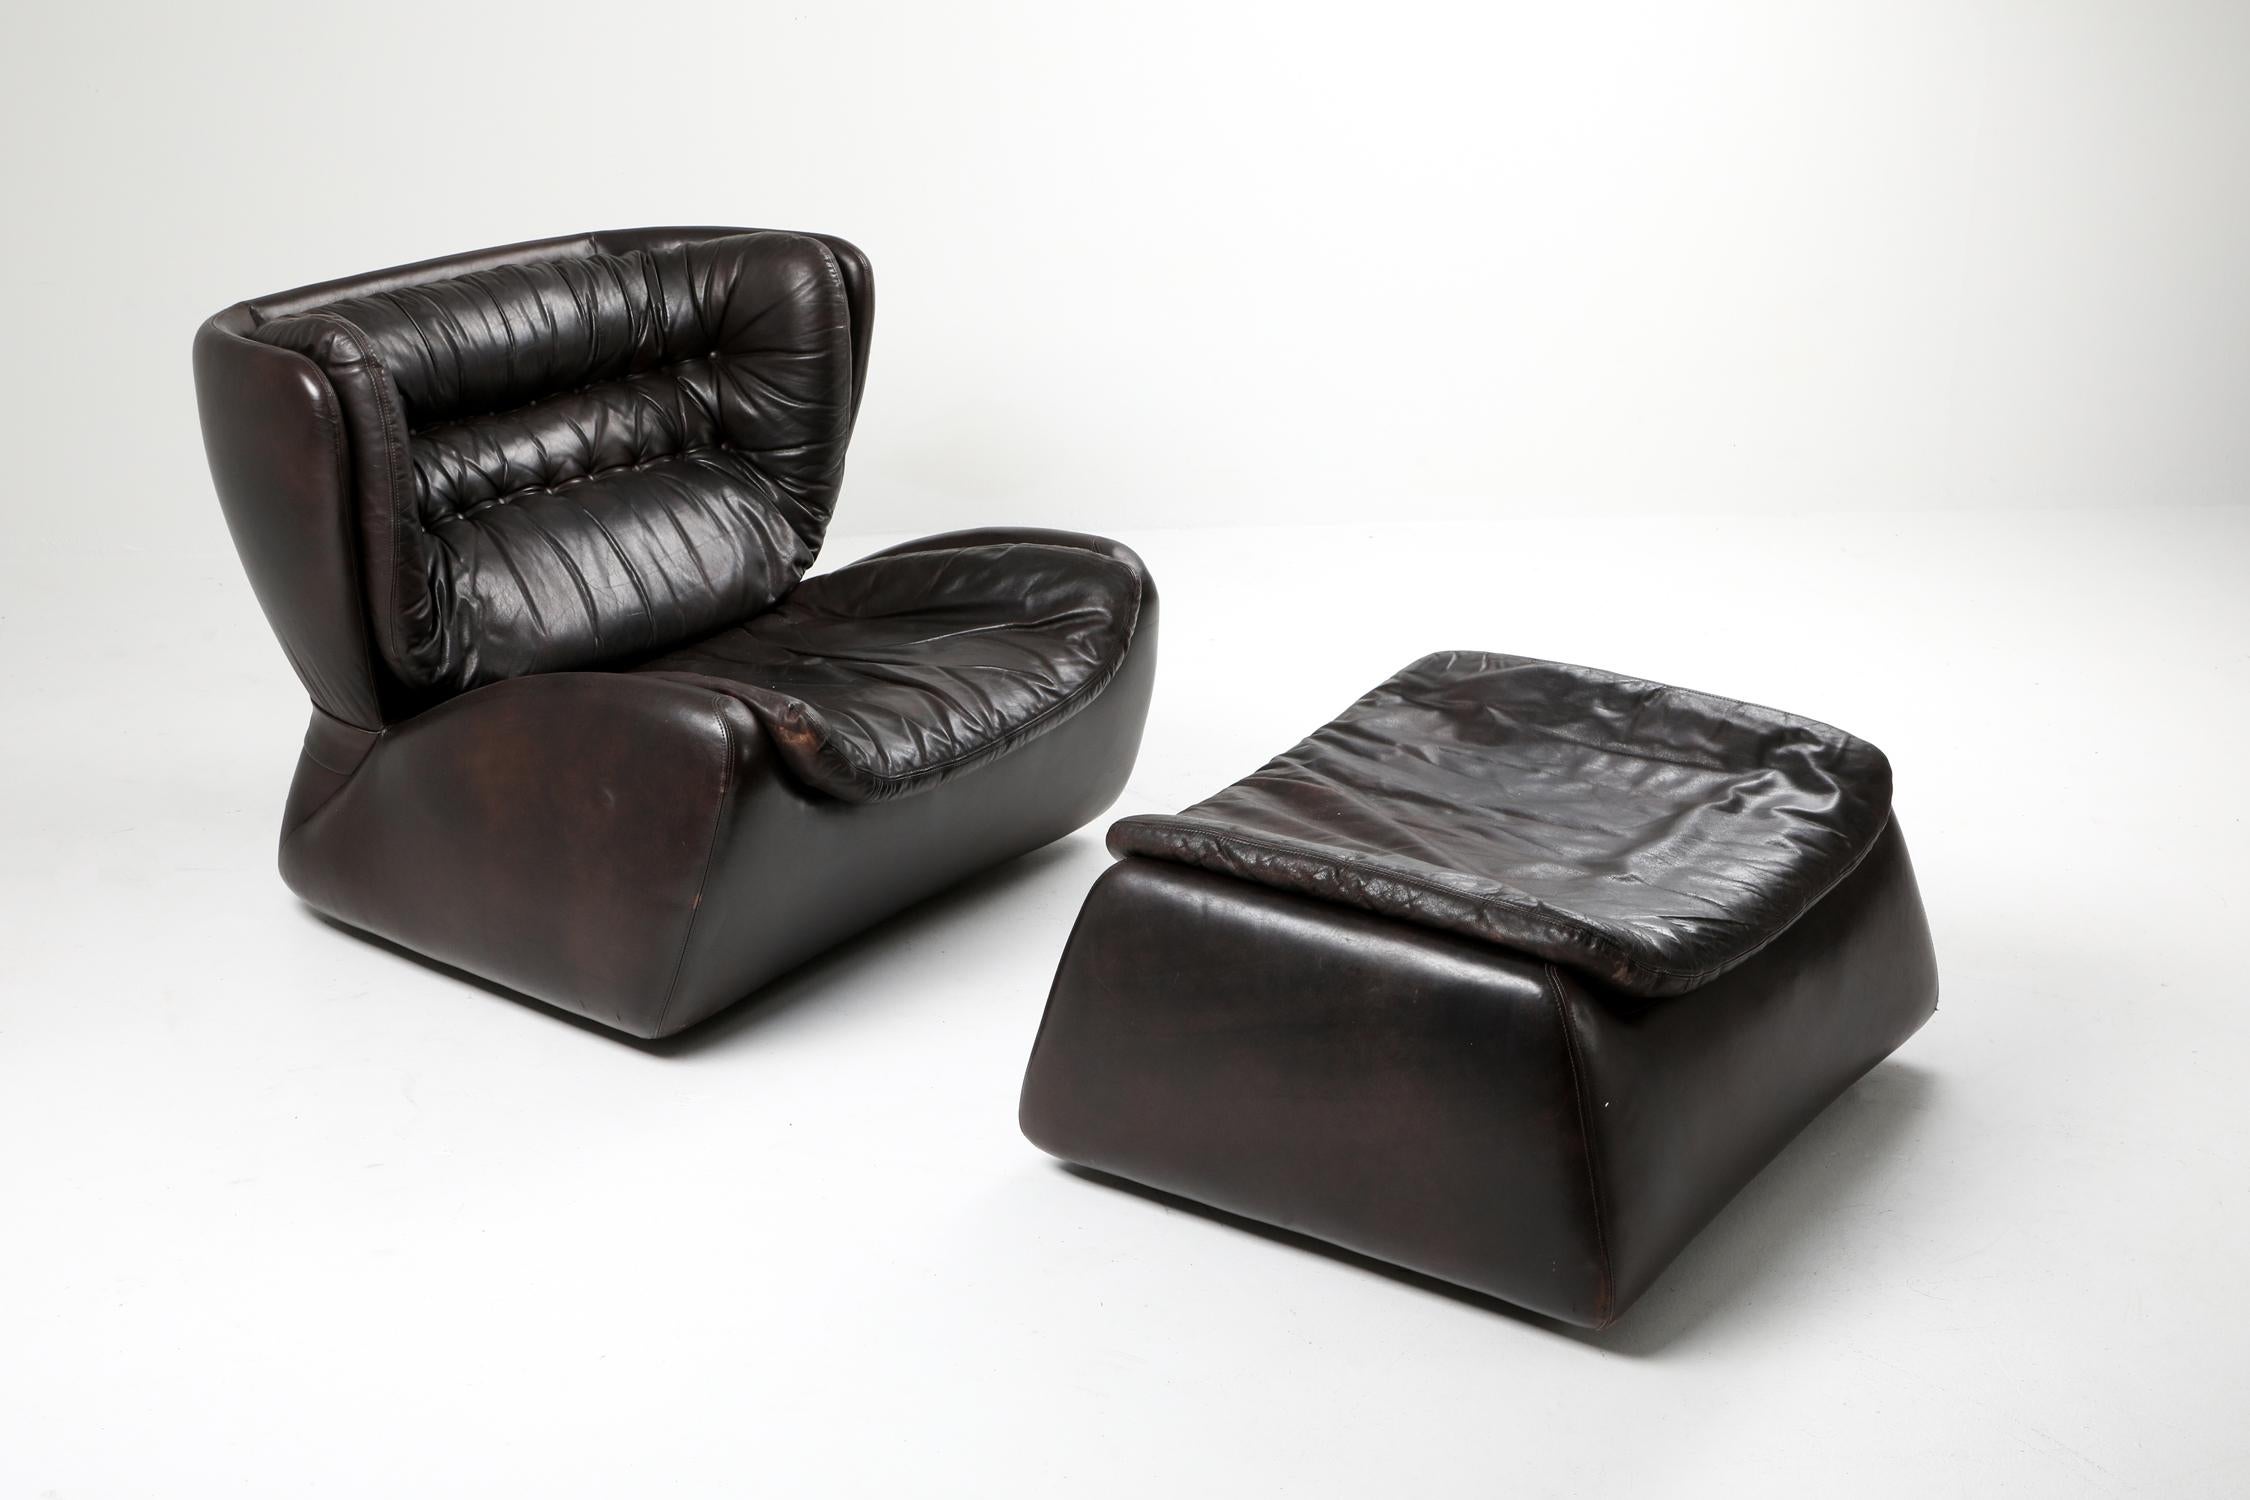 Heinz Waldmann & Anita Schmidt lounge chair and ottoman for Durlet in 1970, dark chocolate brown leather, 

Durlet is a luxury leather furniture brand from Belgium, very much like De Sede in Switserland.

In the 1970s, they had a large selection